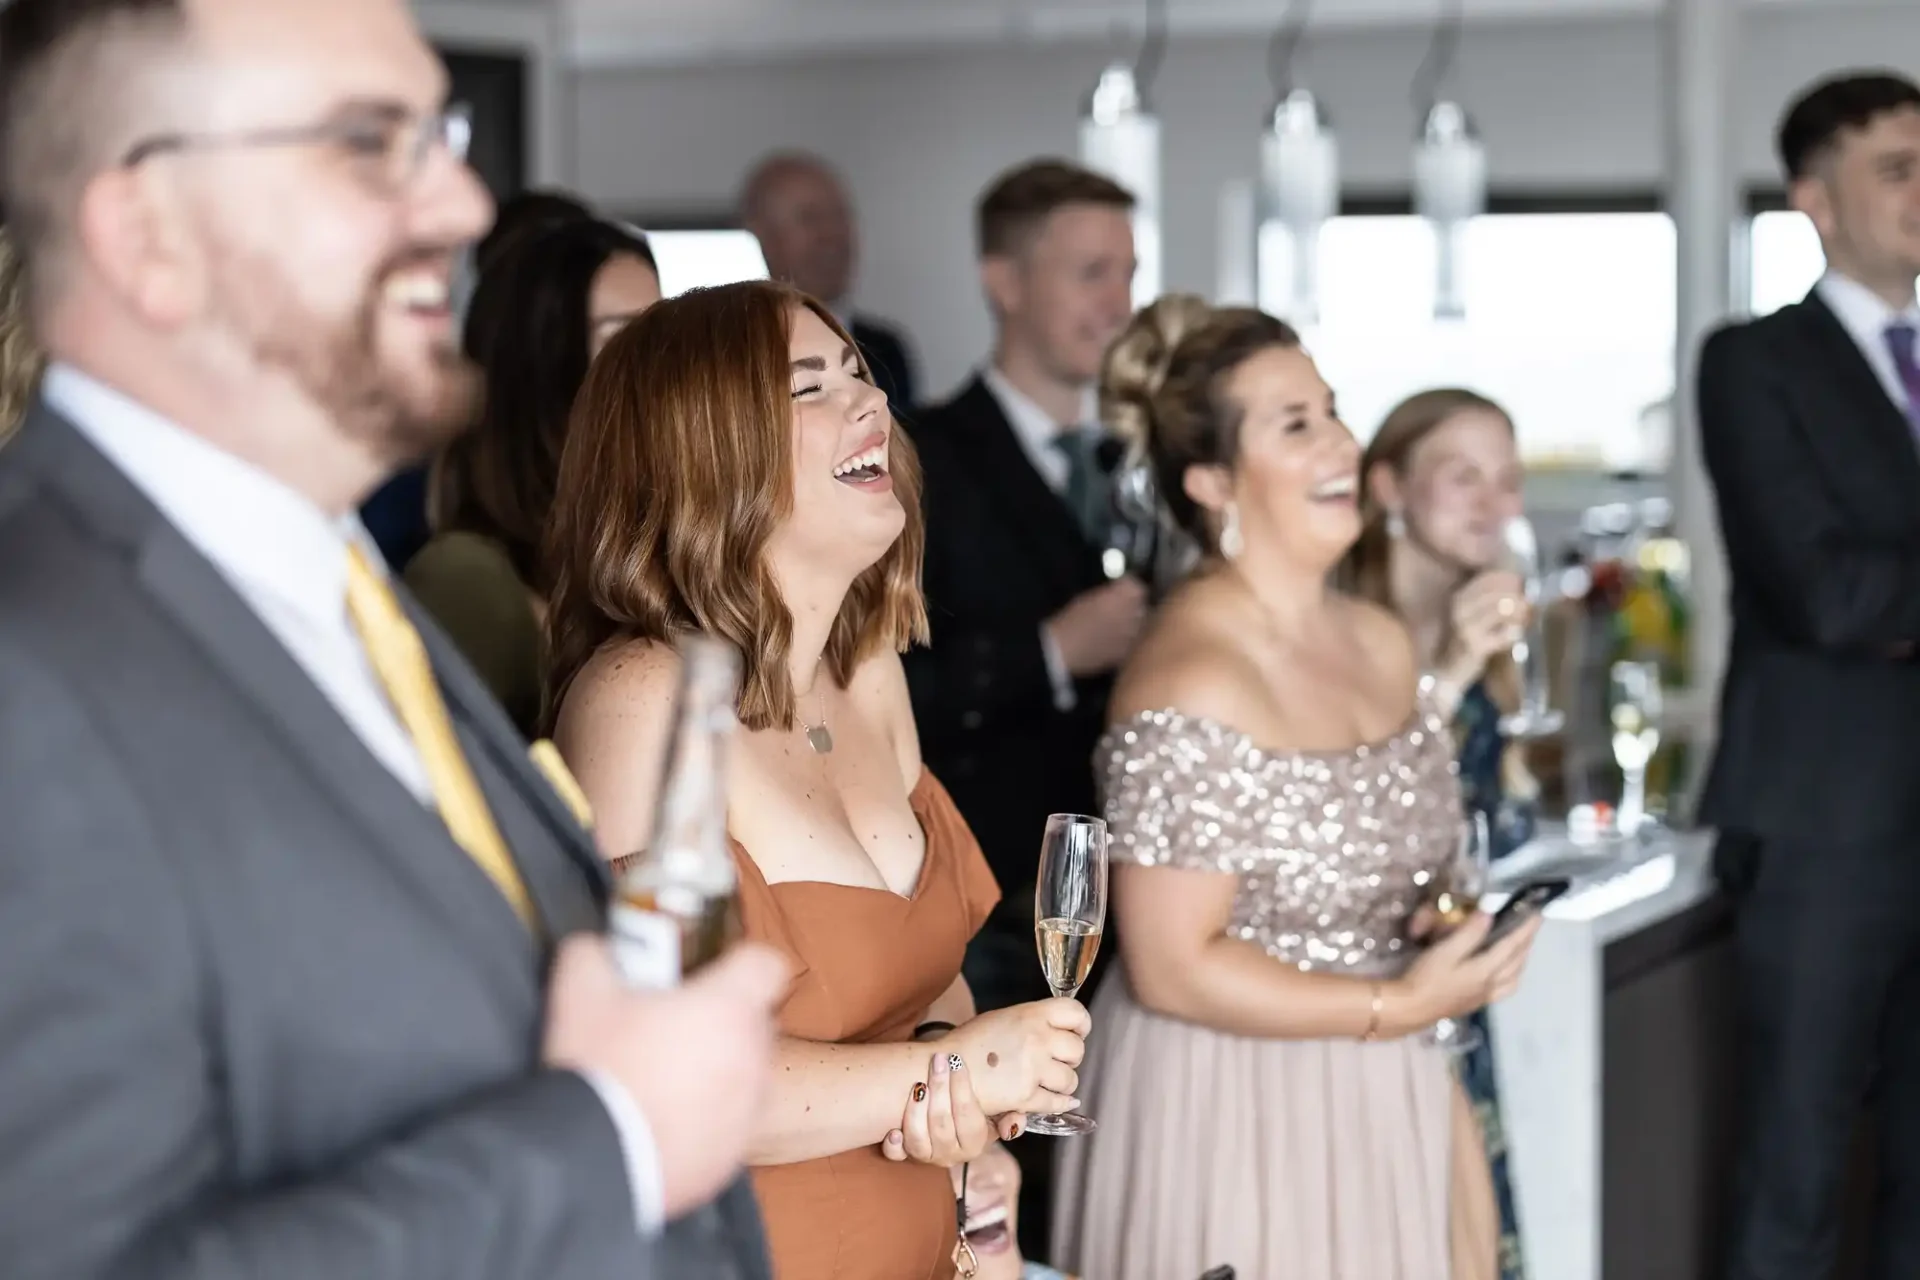 Group of formally dressed people laughing and holding drinks at a social gathering indoors.